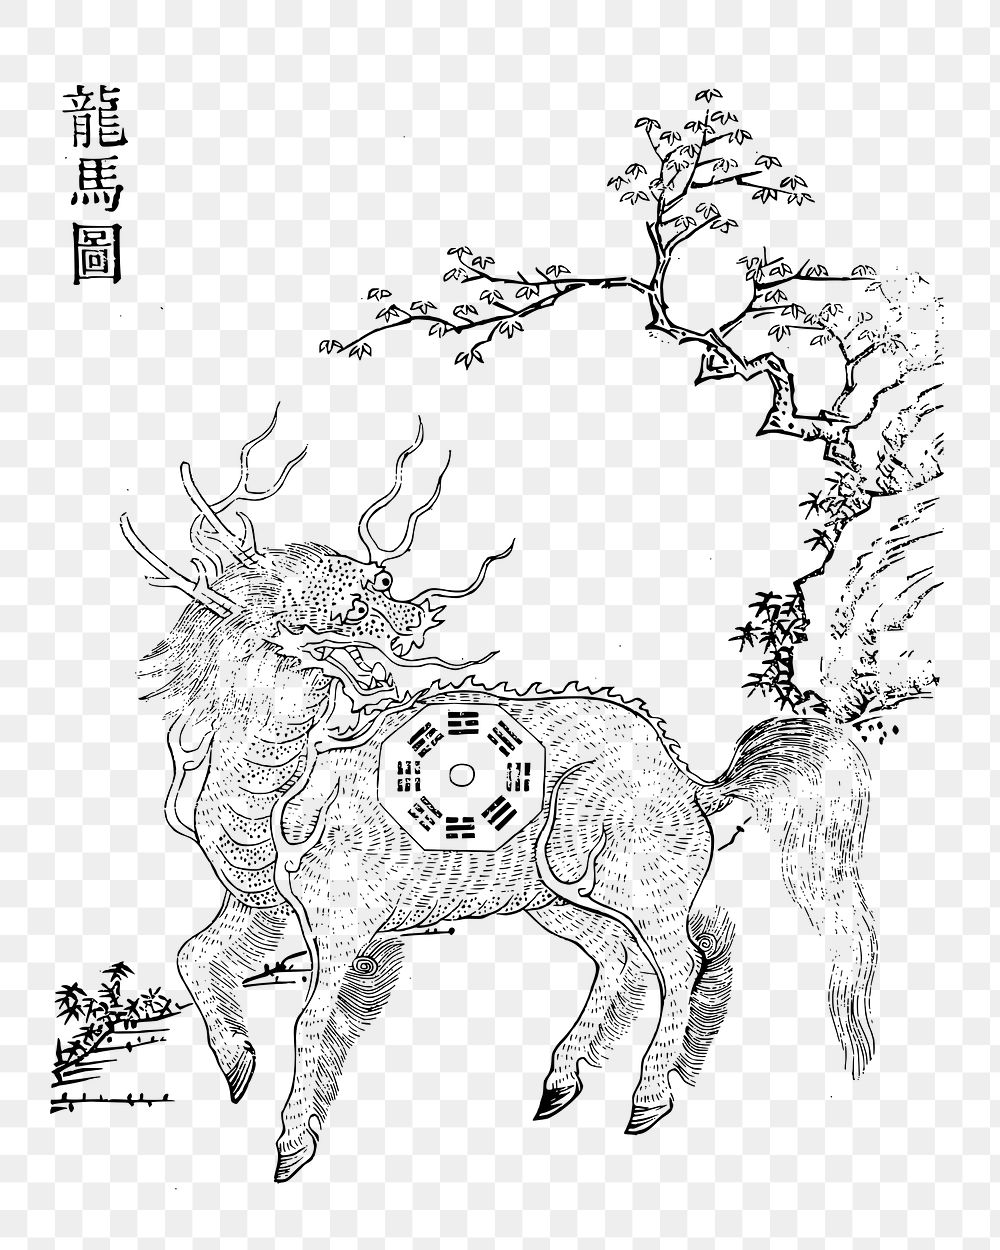 This is a vectorization of an illustration from the Chinese encyclopedia Gujin Tushu Jicheng, section "Animal Kingdom".…